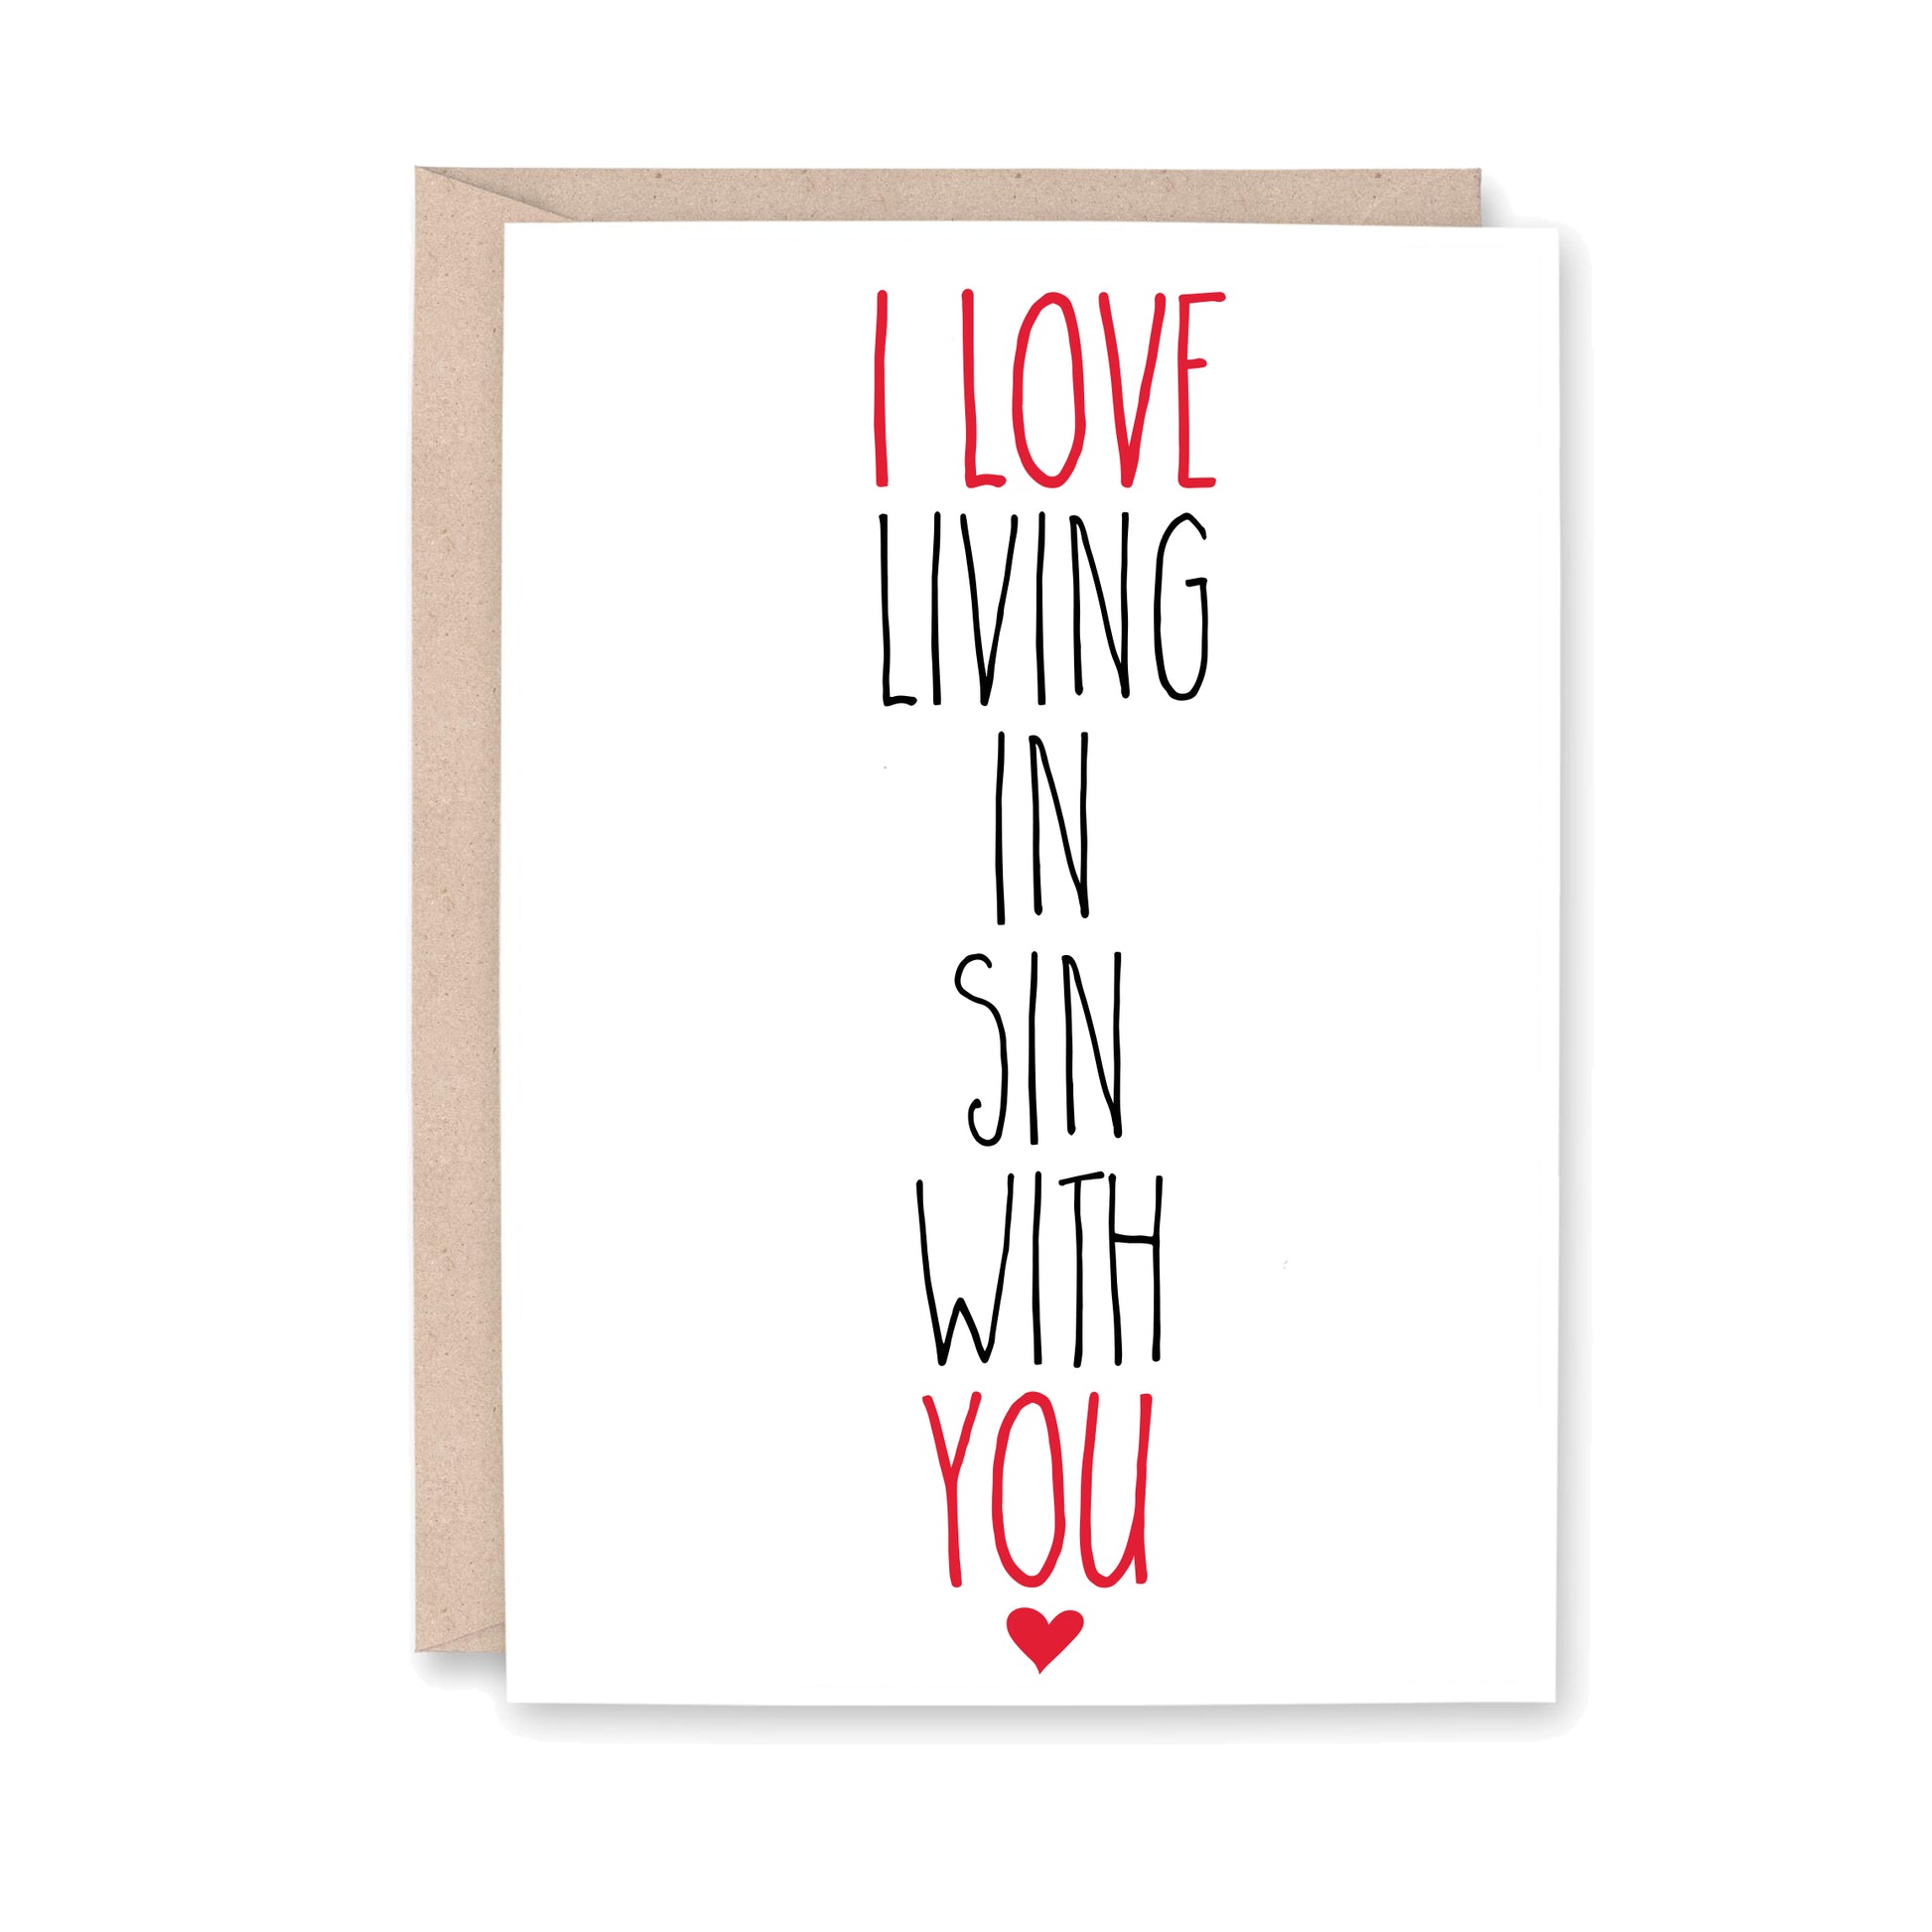 I love living in sin with you